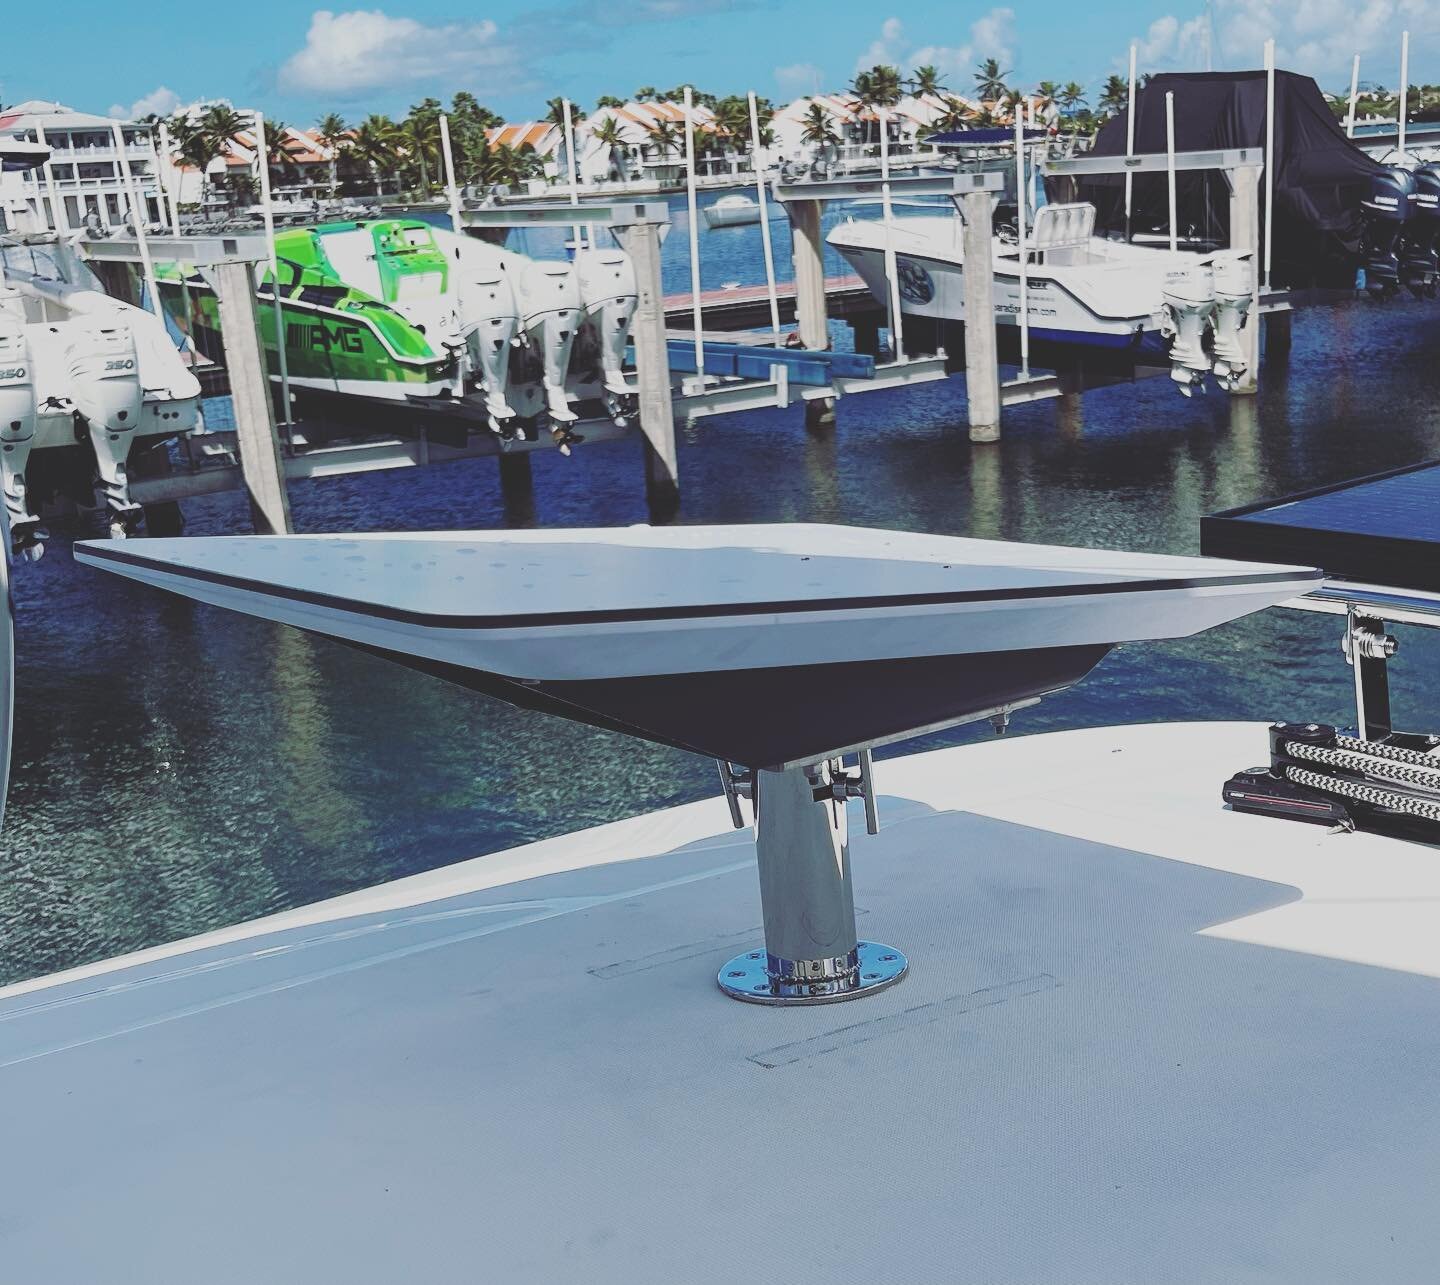 Starlink Maritime swiveling mount system. If you don&rsquo;t want your Starlink Maritime antenna laying down flat we have a solution for you.
Built robust from marine grade stainless steel with machined slots, TiG welded and #8 mirror polished.
#star